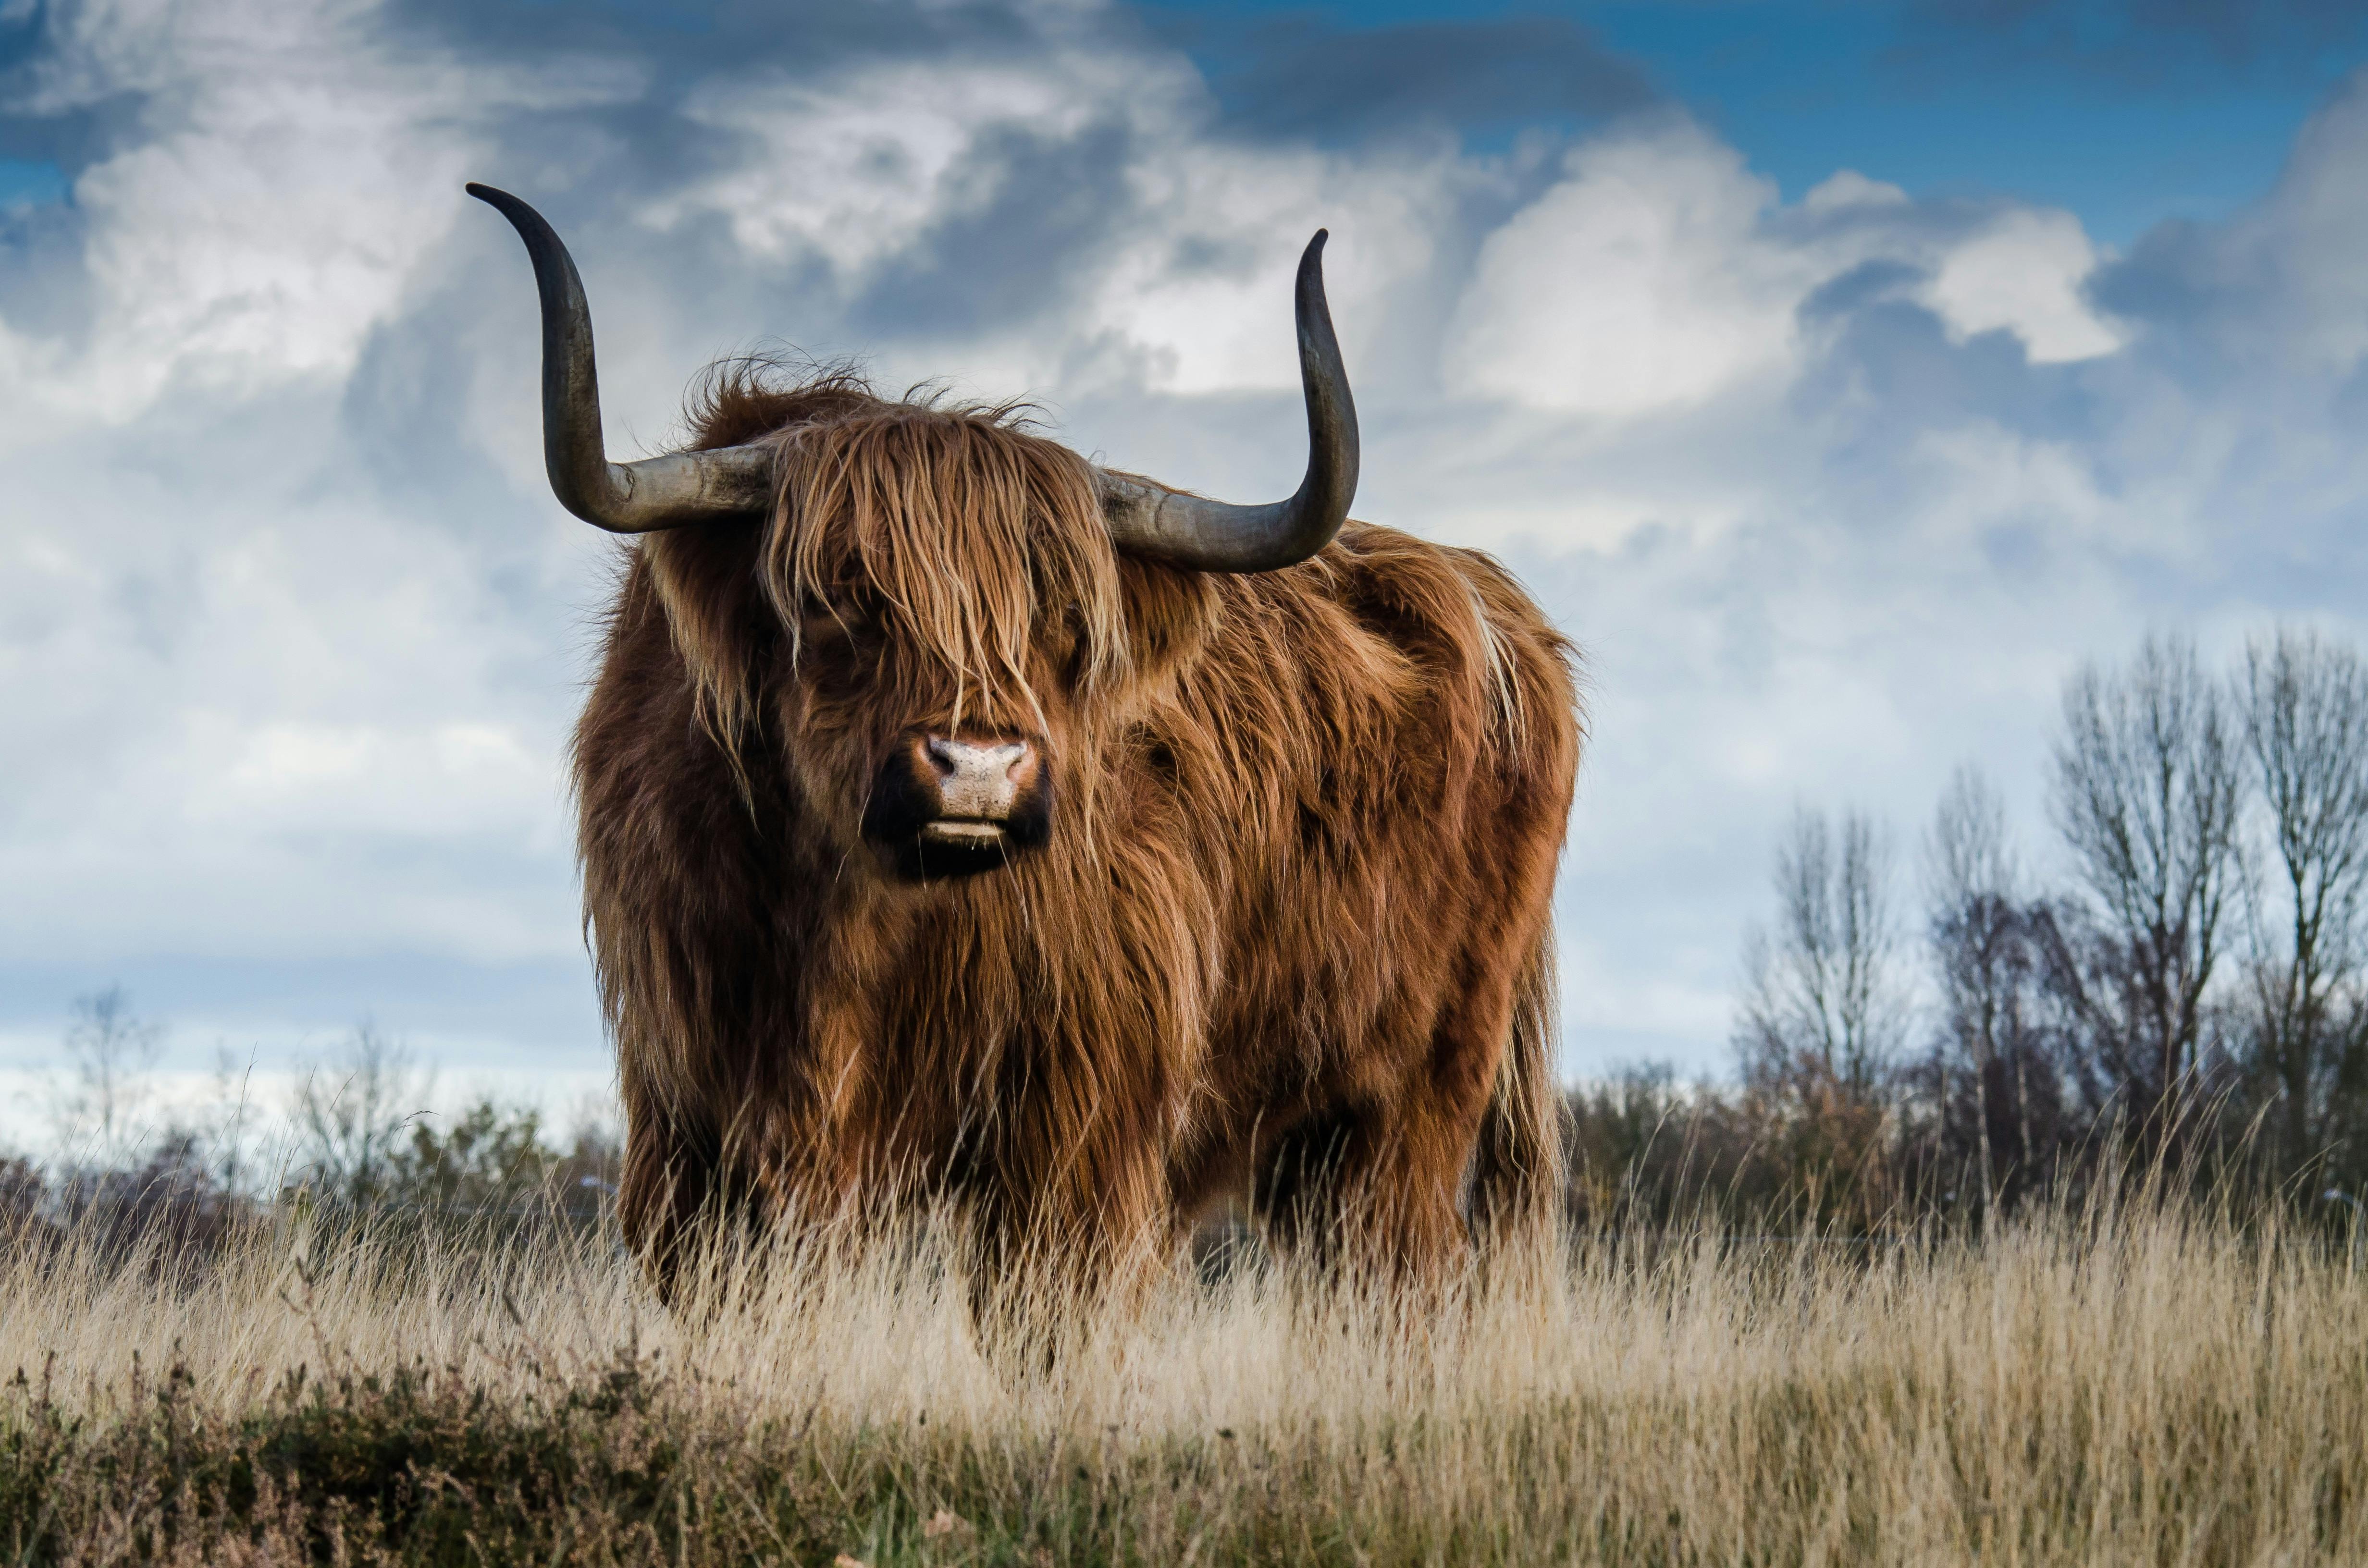 Bull Photos, Download The BEST Free Bull Stock Photos & HD Images